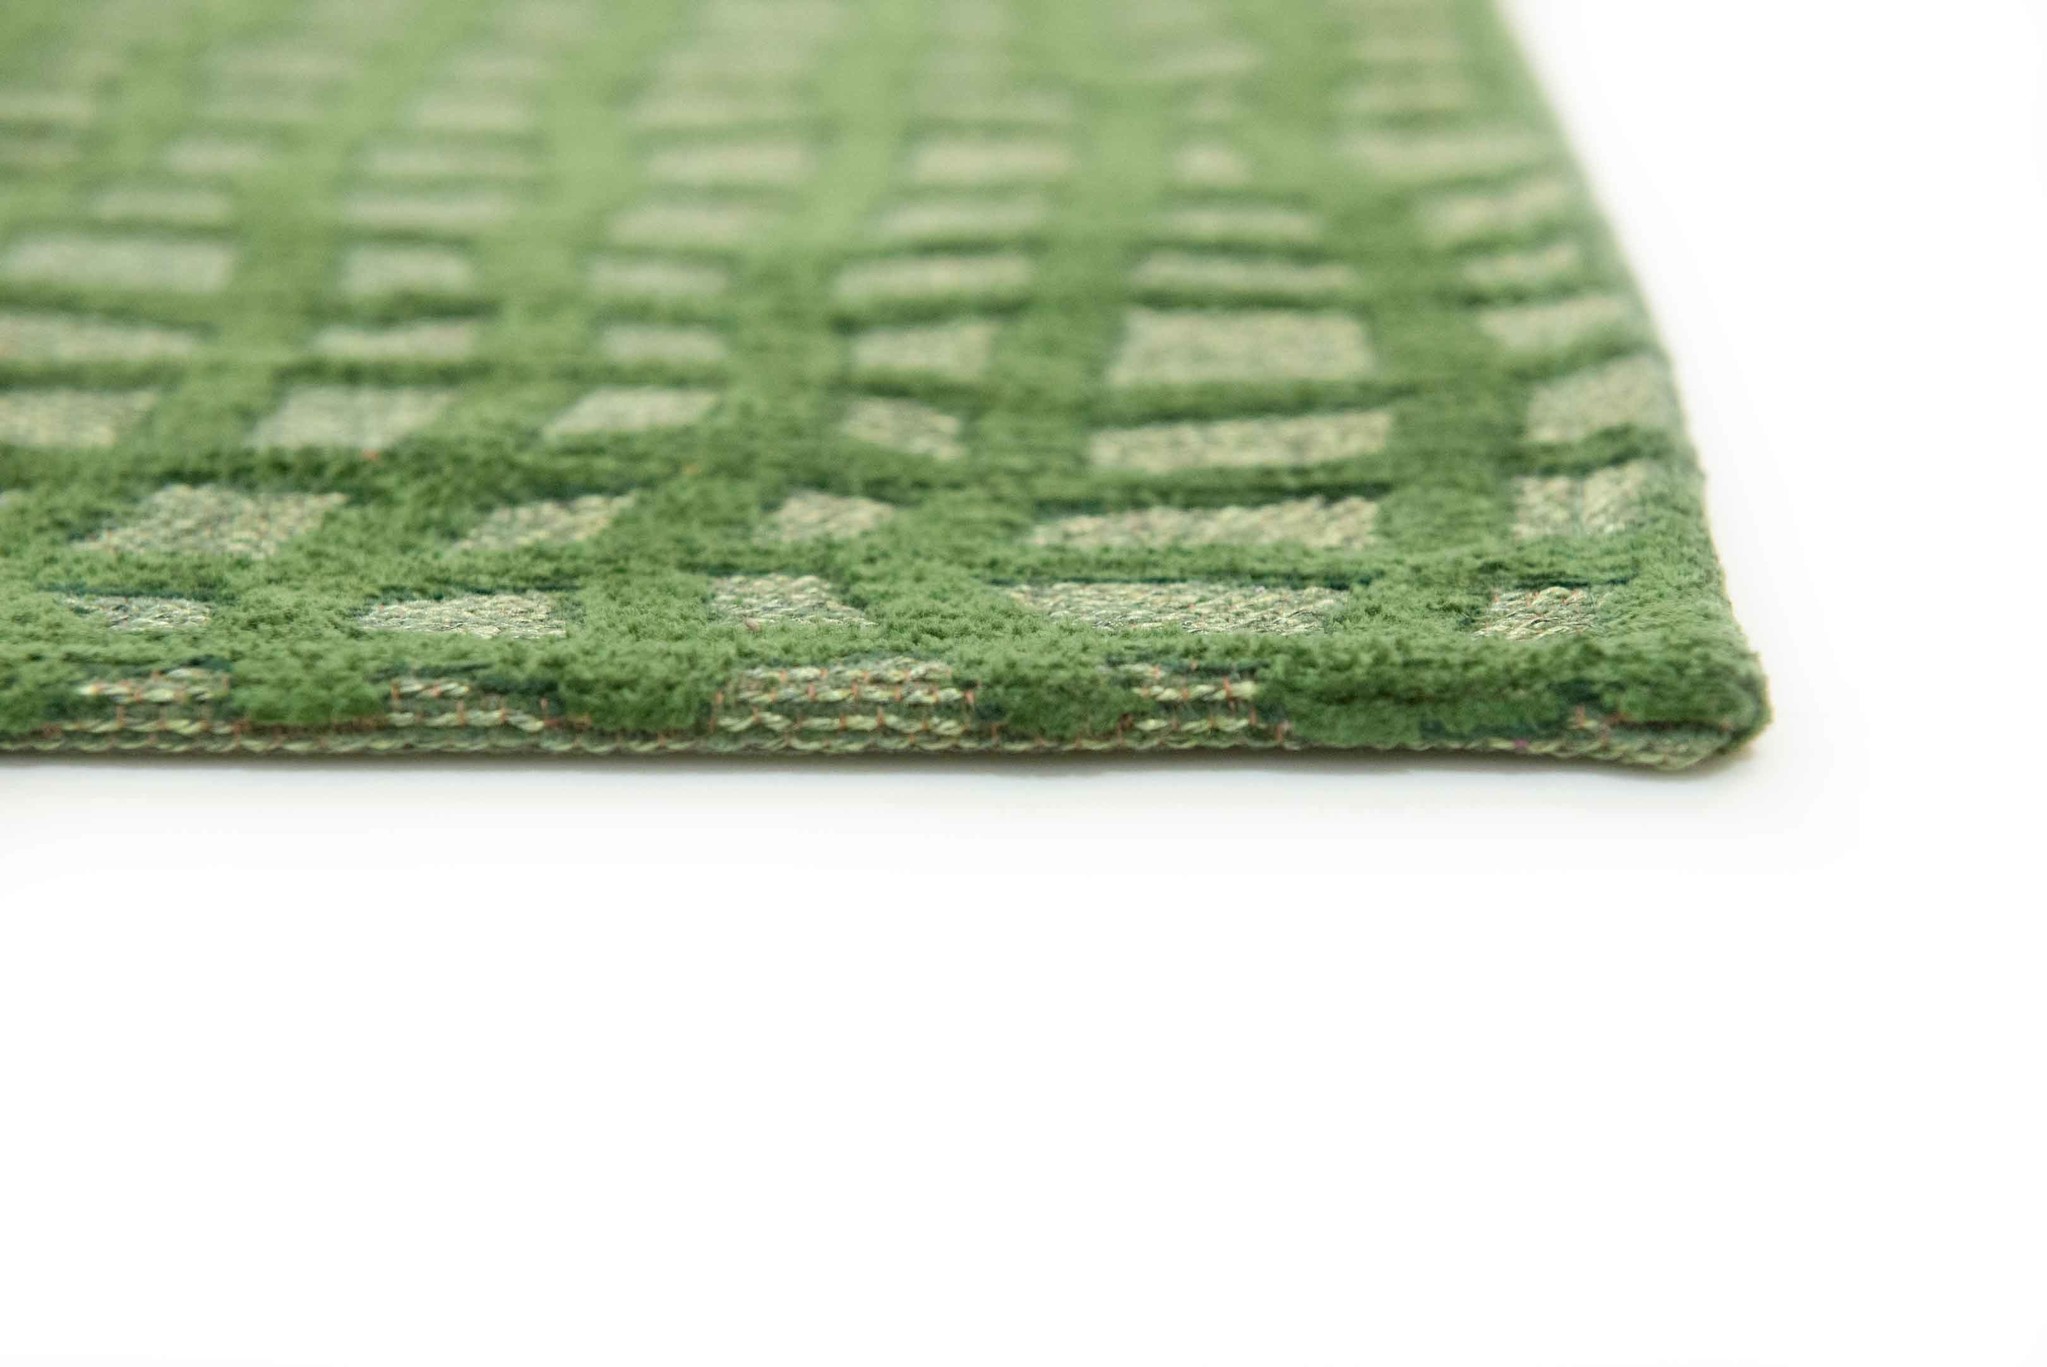 Green Checkered Flatwoven Rug ☞ Size: 4' 7" x 6' 7" (140 x 200 cm)